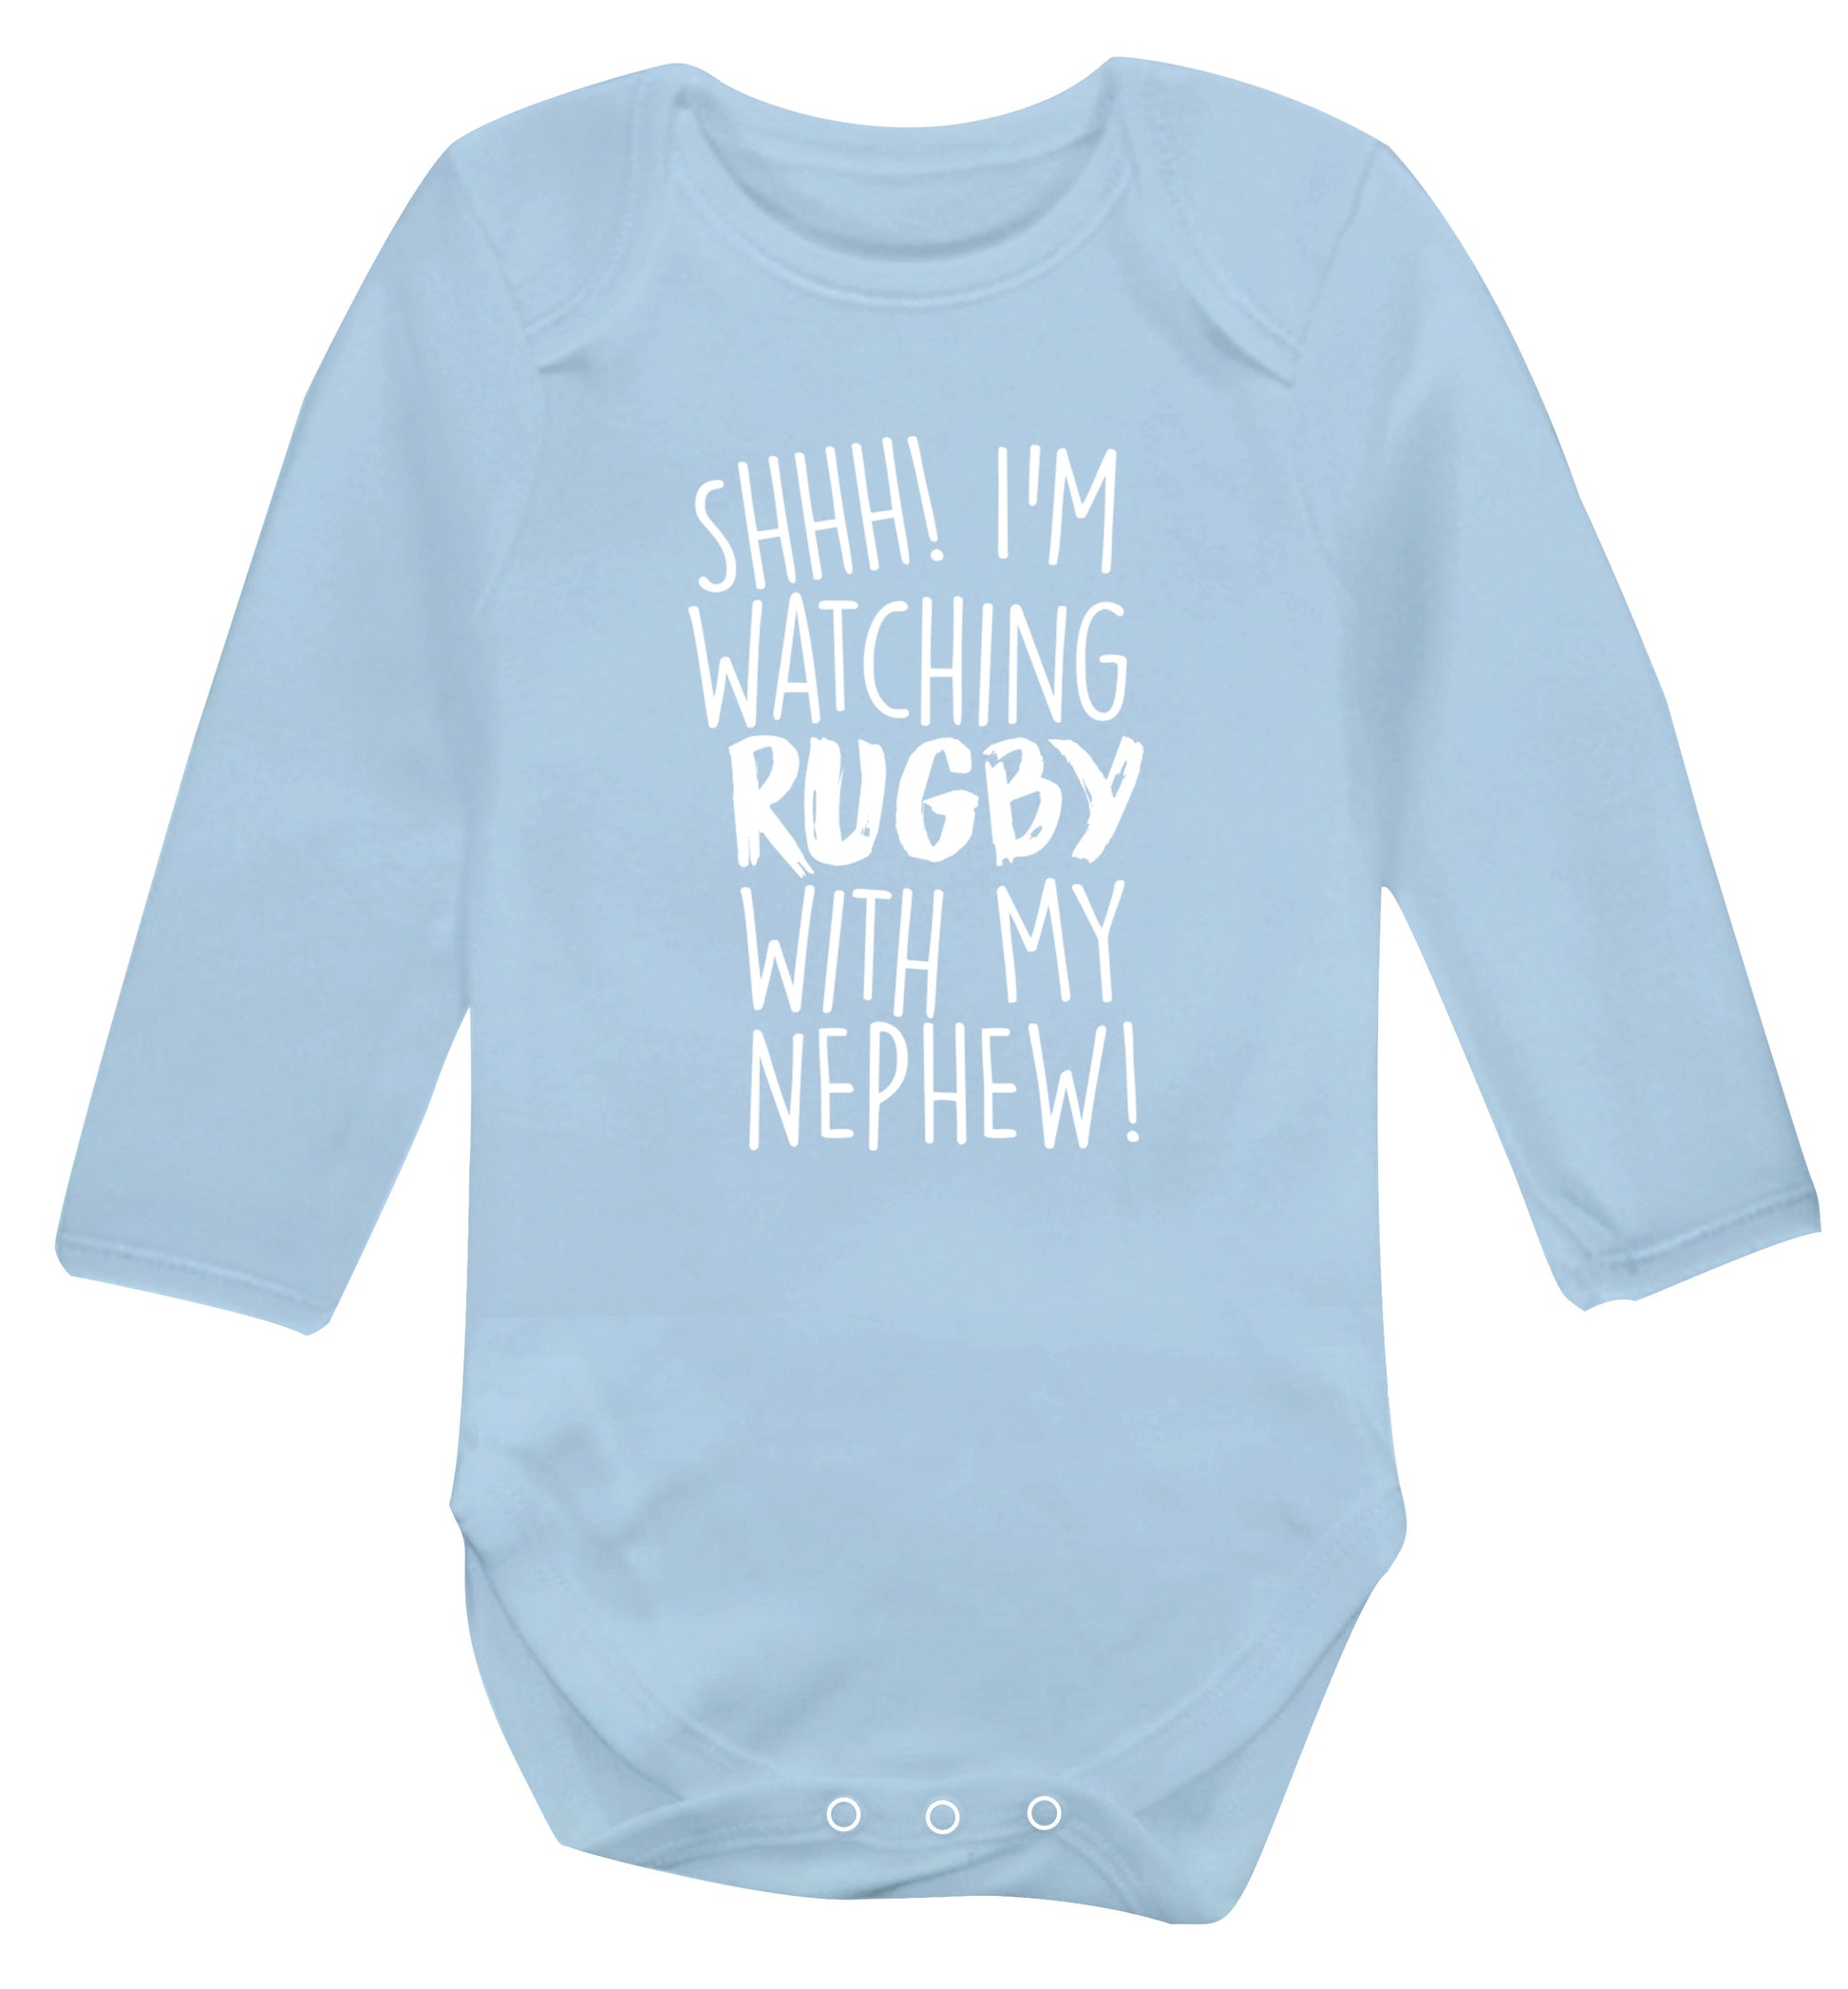 Shh.. I'm watching rugby with my nephew Baby Vest long sleeved pale blue 6-12 months